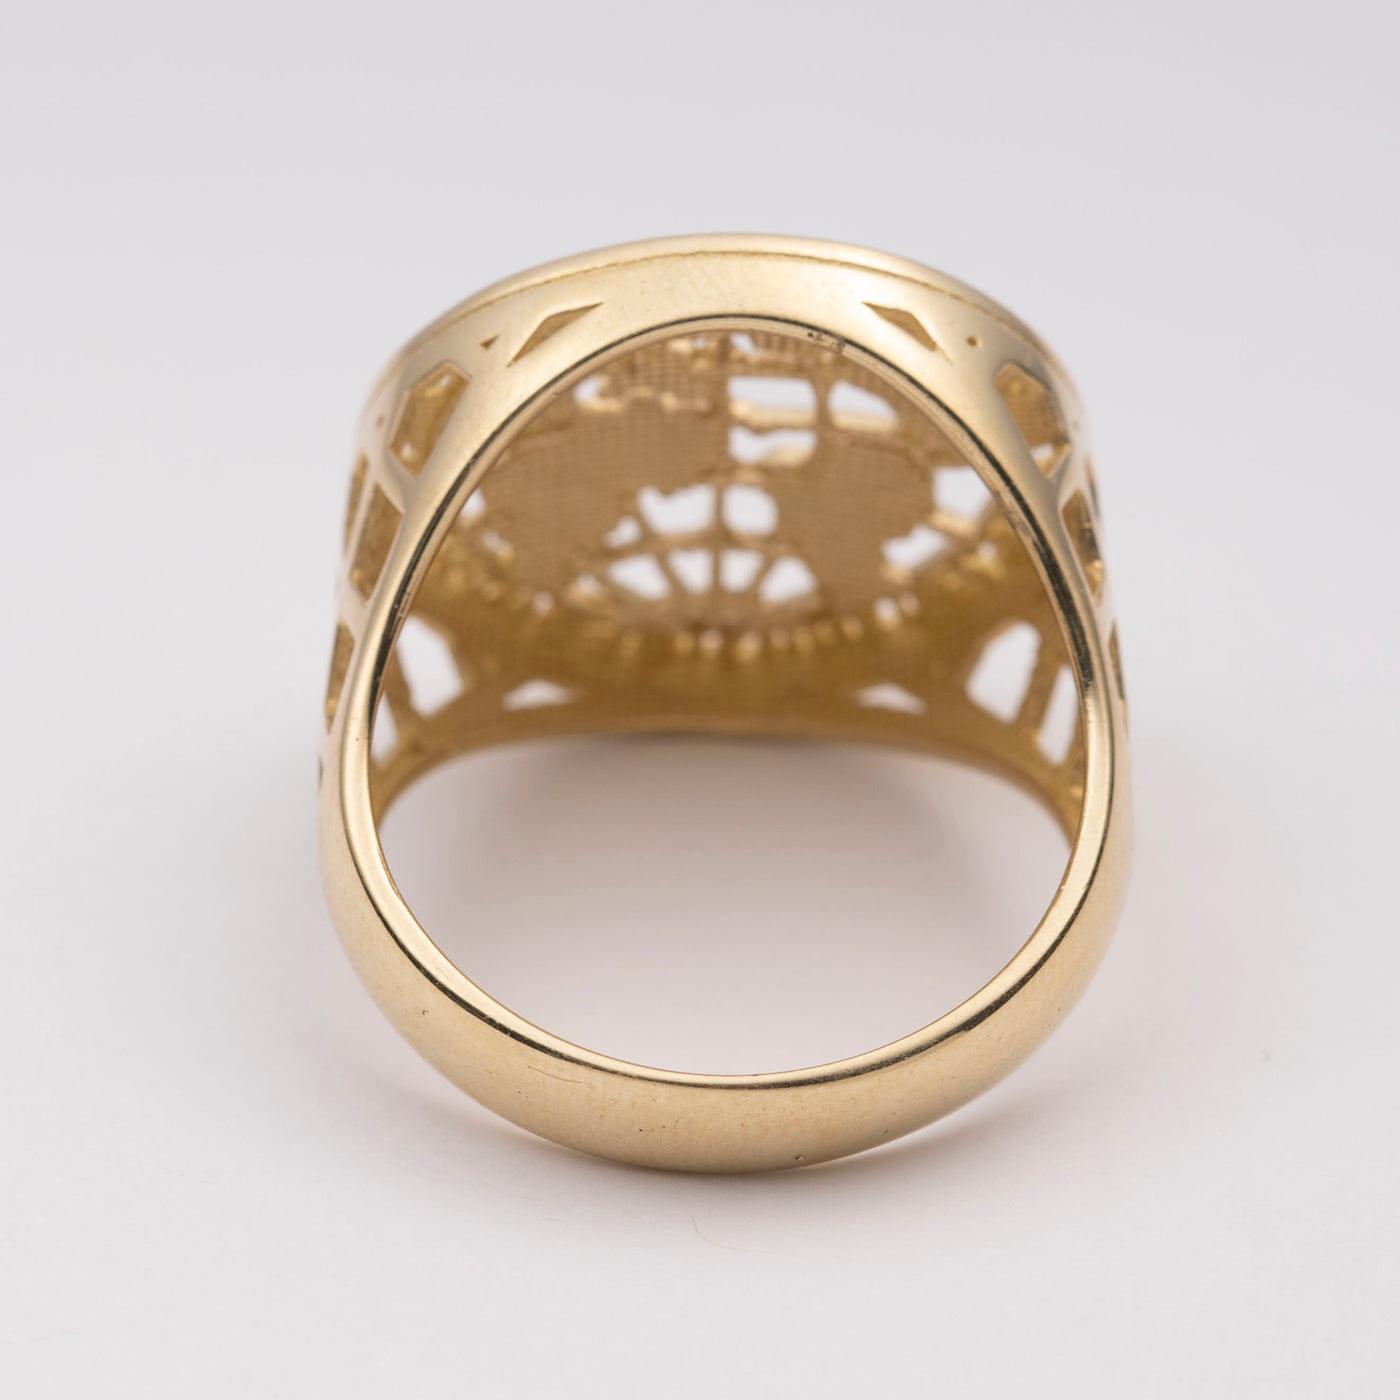 Men's "The World is Yours" Ring 10K Yellow Gold